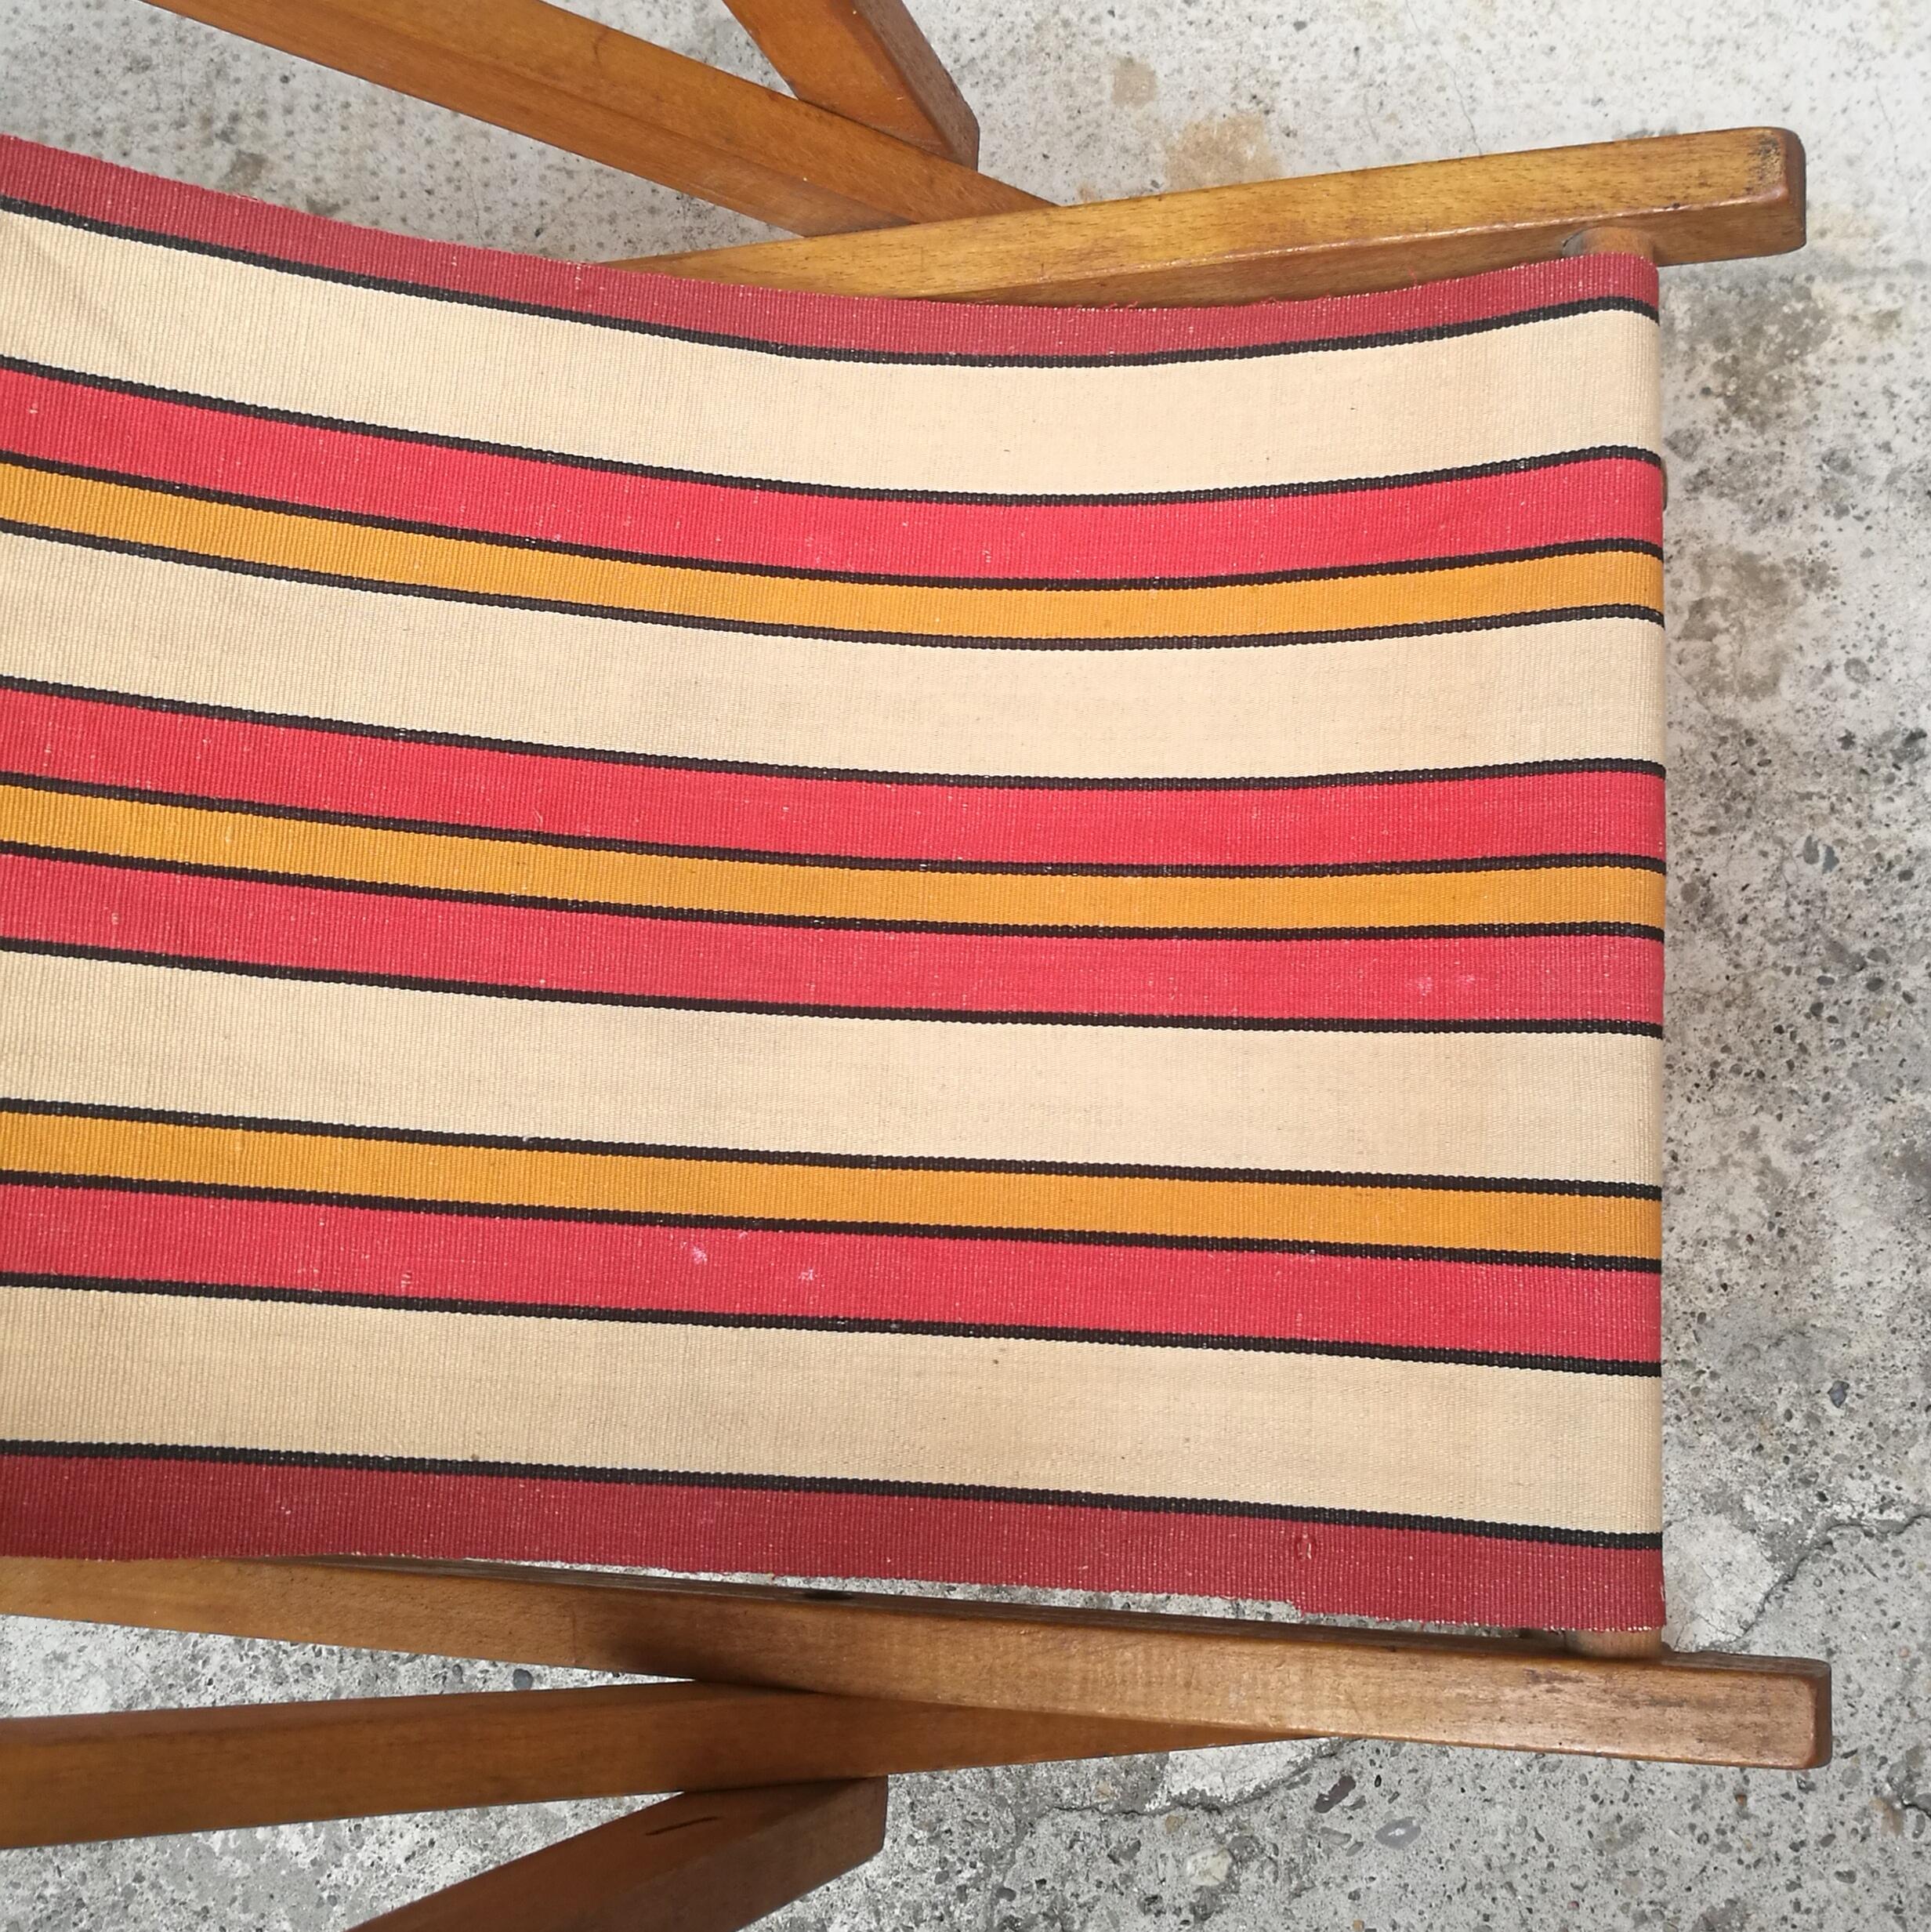 Italian mid-century small wood deckchair with original fabric, 1950s
Beautiful mini deckchair for children in wood from 1950s
Original fabric orange and white wood in patina, very good conditions.
90x50x80h cm
